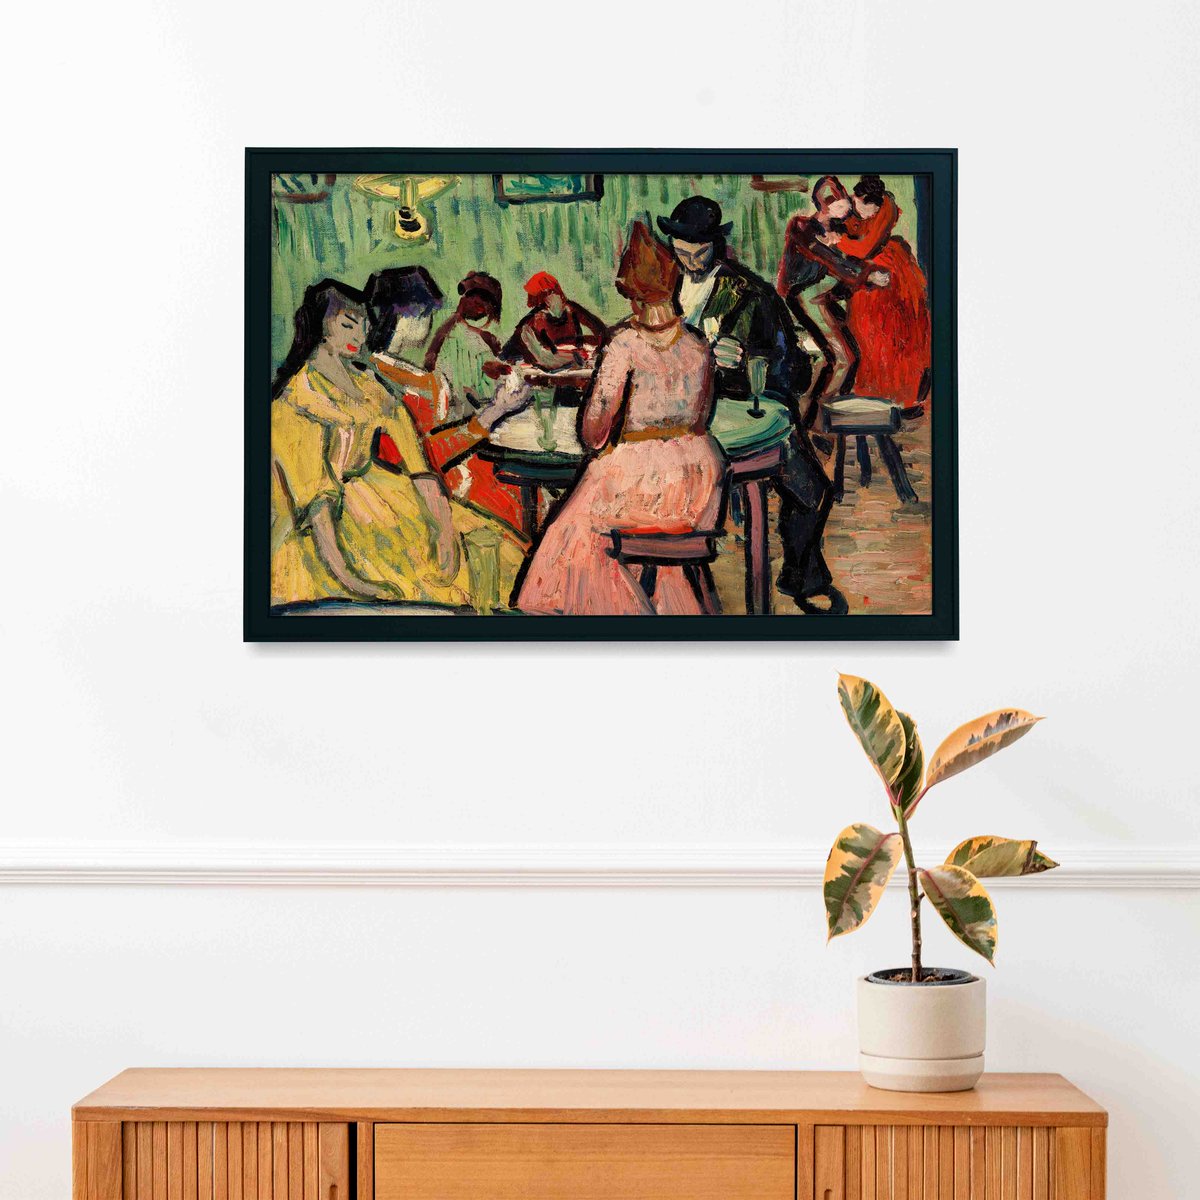 Put this vintage painting of a poker room in your game room now by clicking the link in our bio. #linkinbio #pokergifts #pokertable #pokercards #blackjacktable #gamenight #pokerposter #girlsnightout #pokerrounders #gifts #pokerwallart #pokercanvas #gameroomcanvasart #gamer